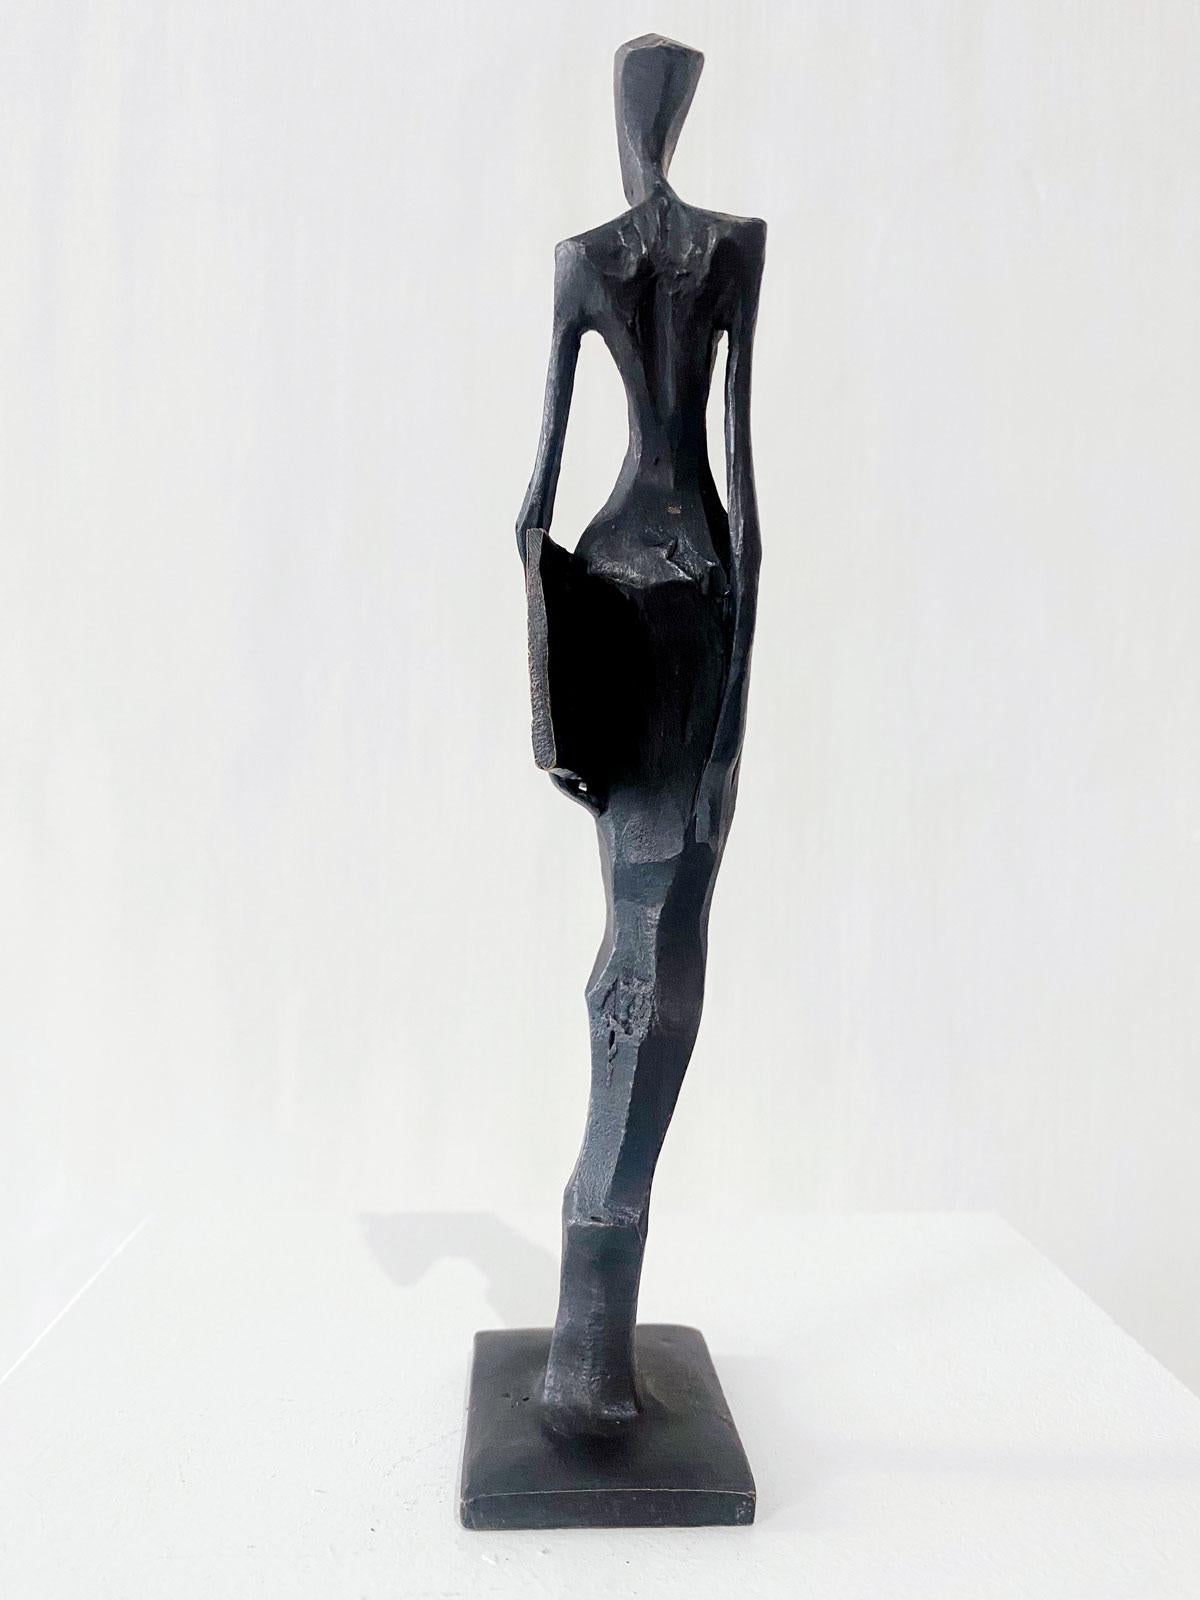 Woman with Photo is an elegant figurative bronze sculpture by Nando Kallweit.

Modelled on modern youthful postures but with a nod to the importance of heritage through the stylised Egyptian-influenced head. A lovely piece on its own or with a group